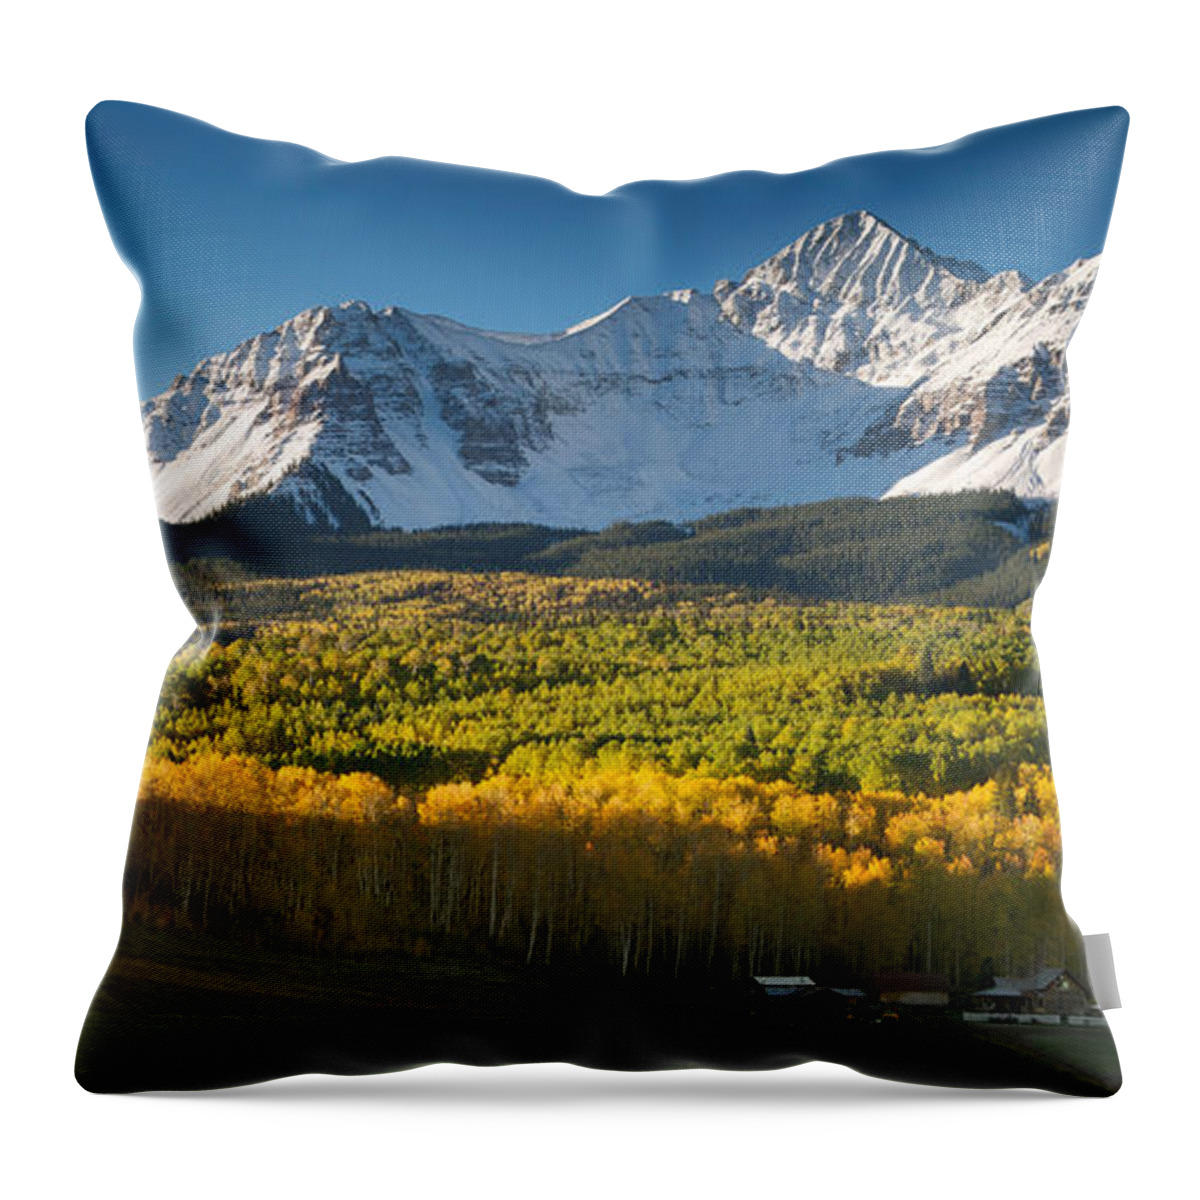 Wilson Throw Pillow featuring the photograph Wilson Peak #1 by Aaron Spong